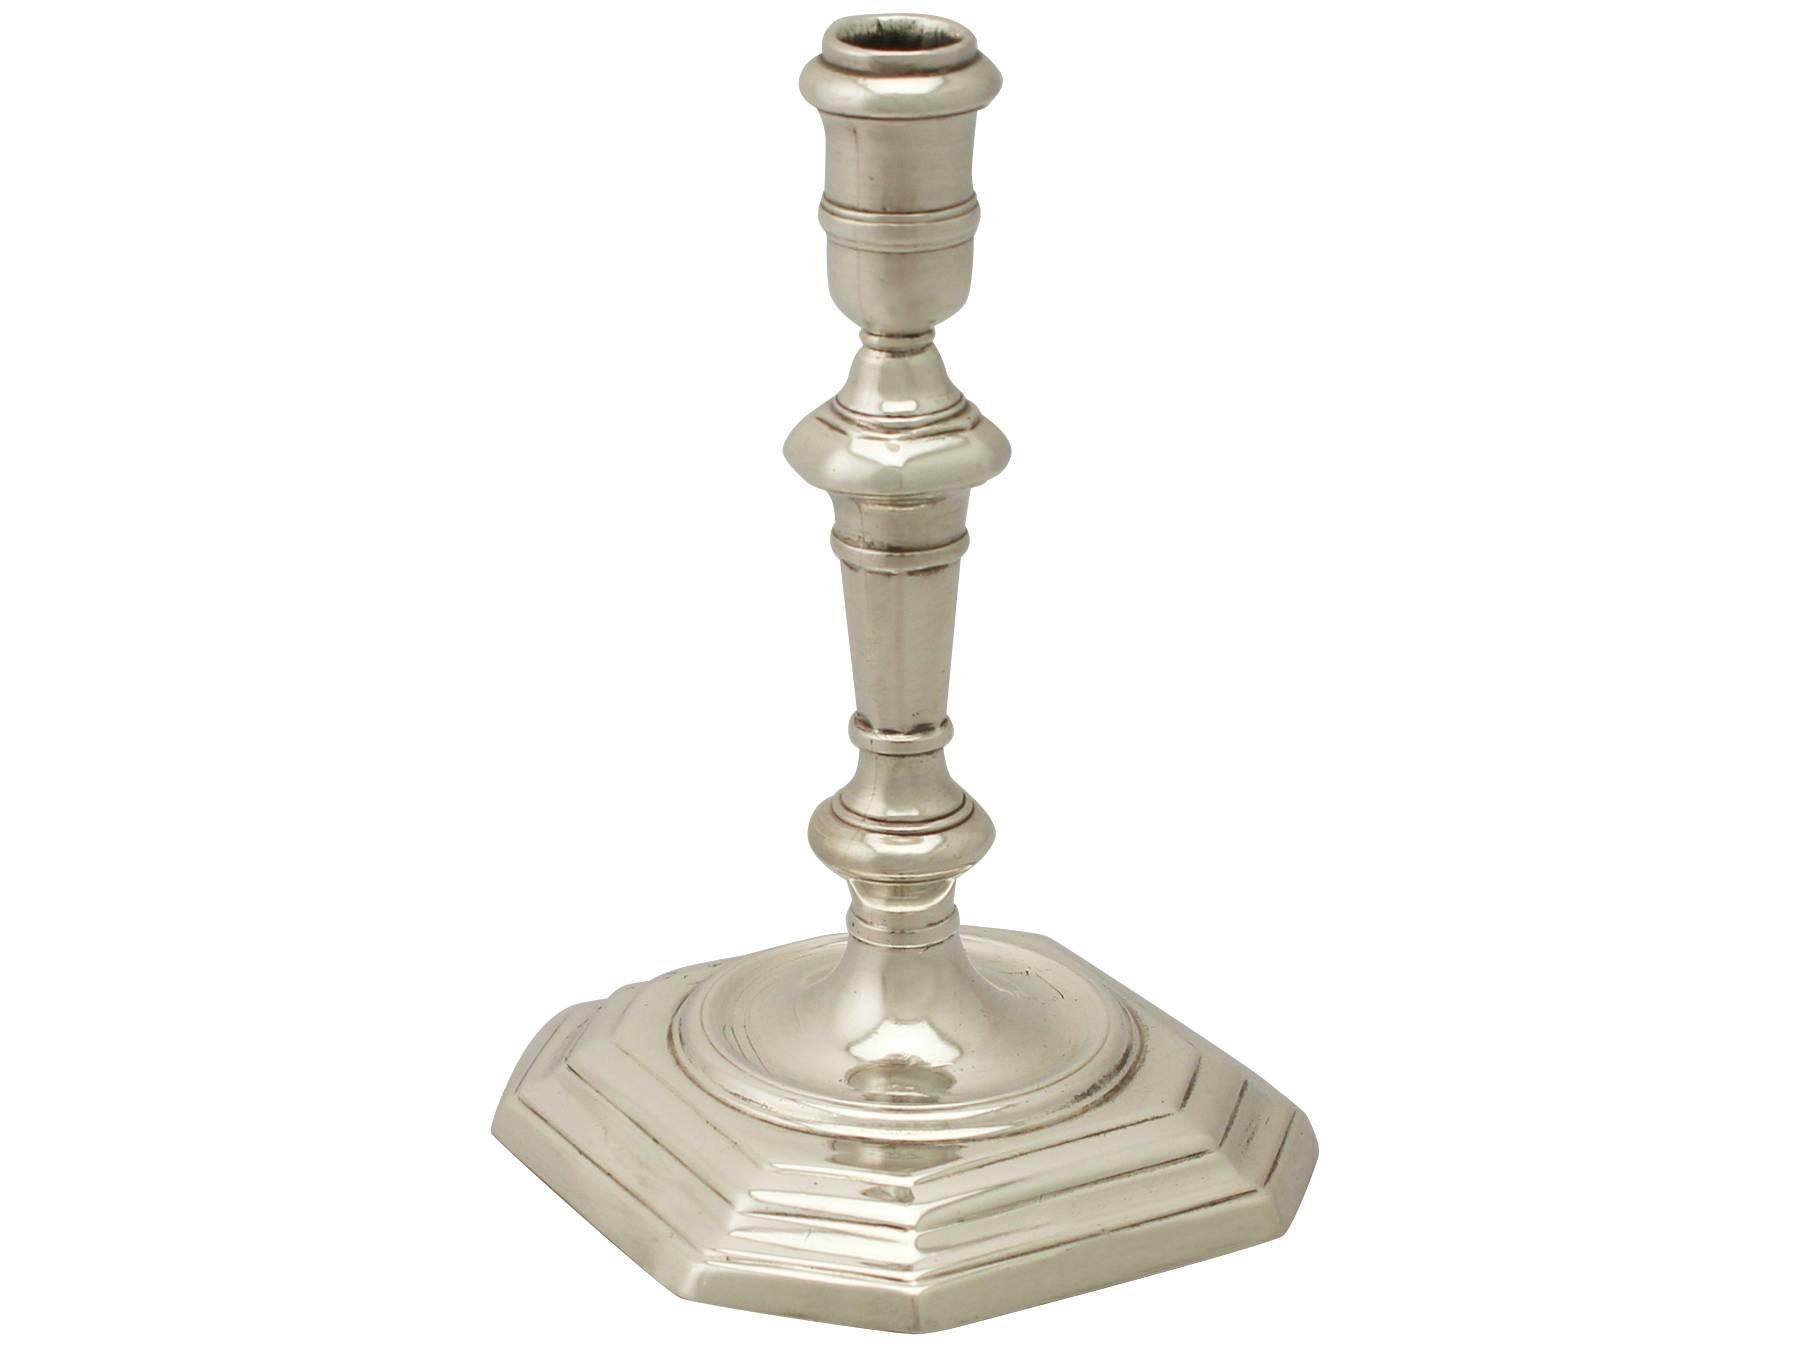 An exceptional, fine and impressive antique early Georgian English cast sterling silver taperstick; an addition to our ornamental silverware collection

This exceptional antique George I cast sterling silver taperstick has a plain classical